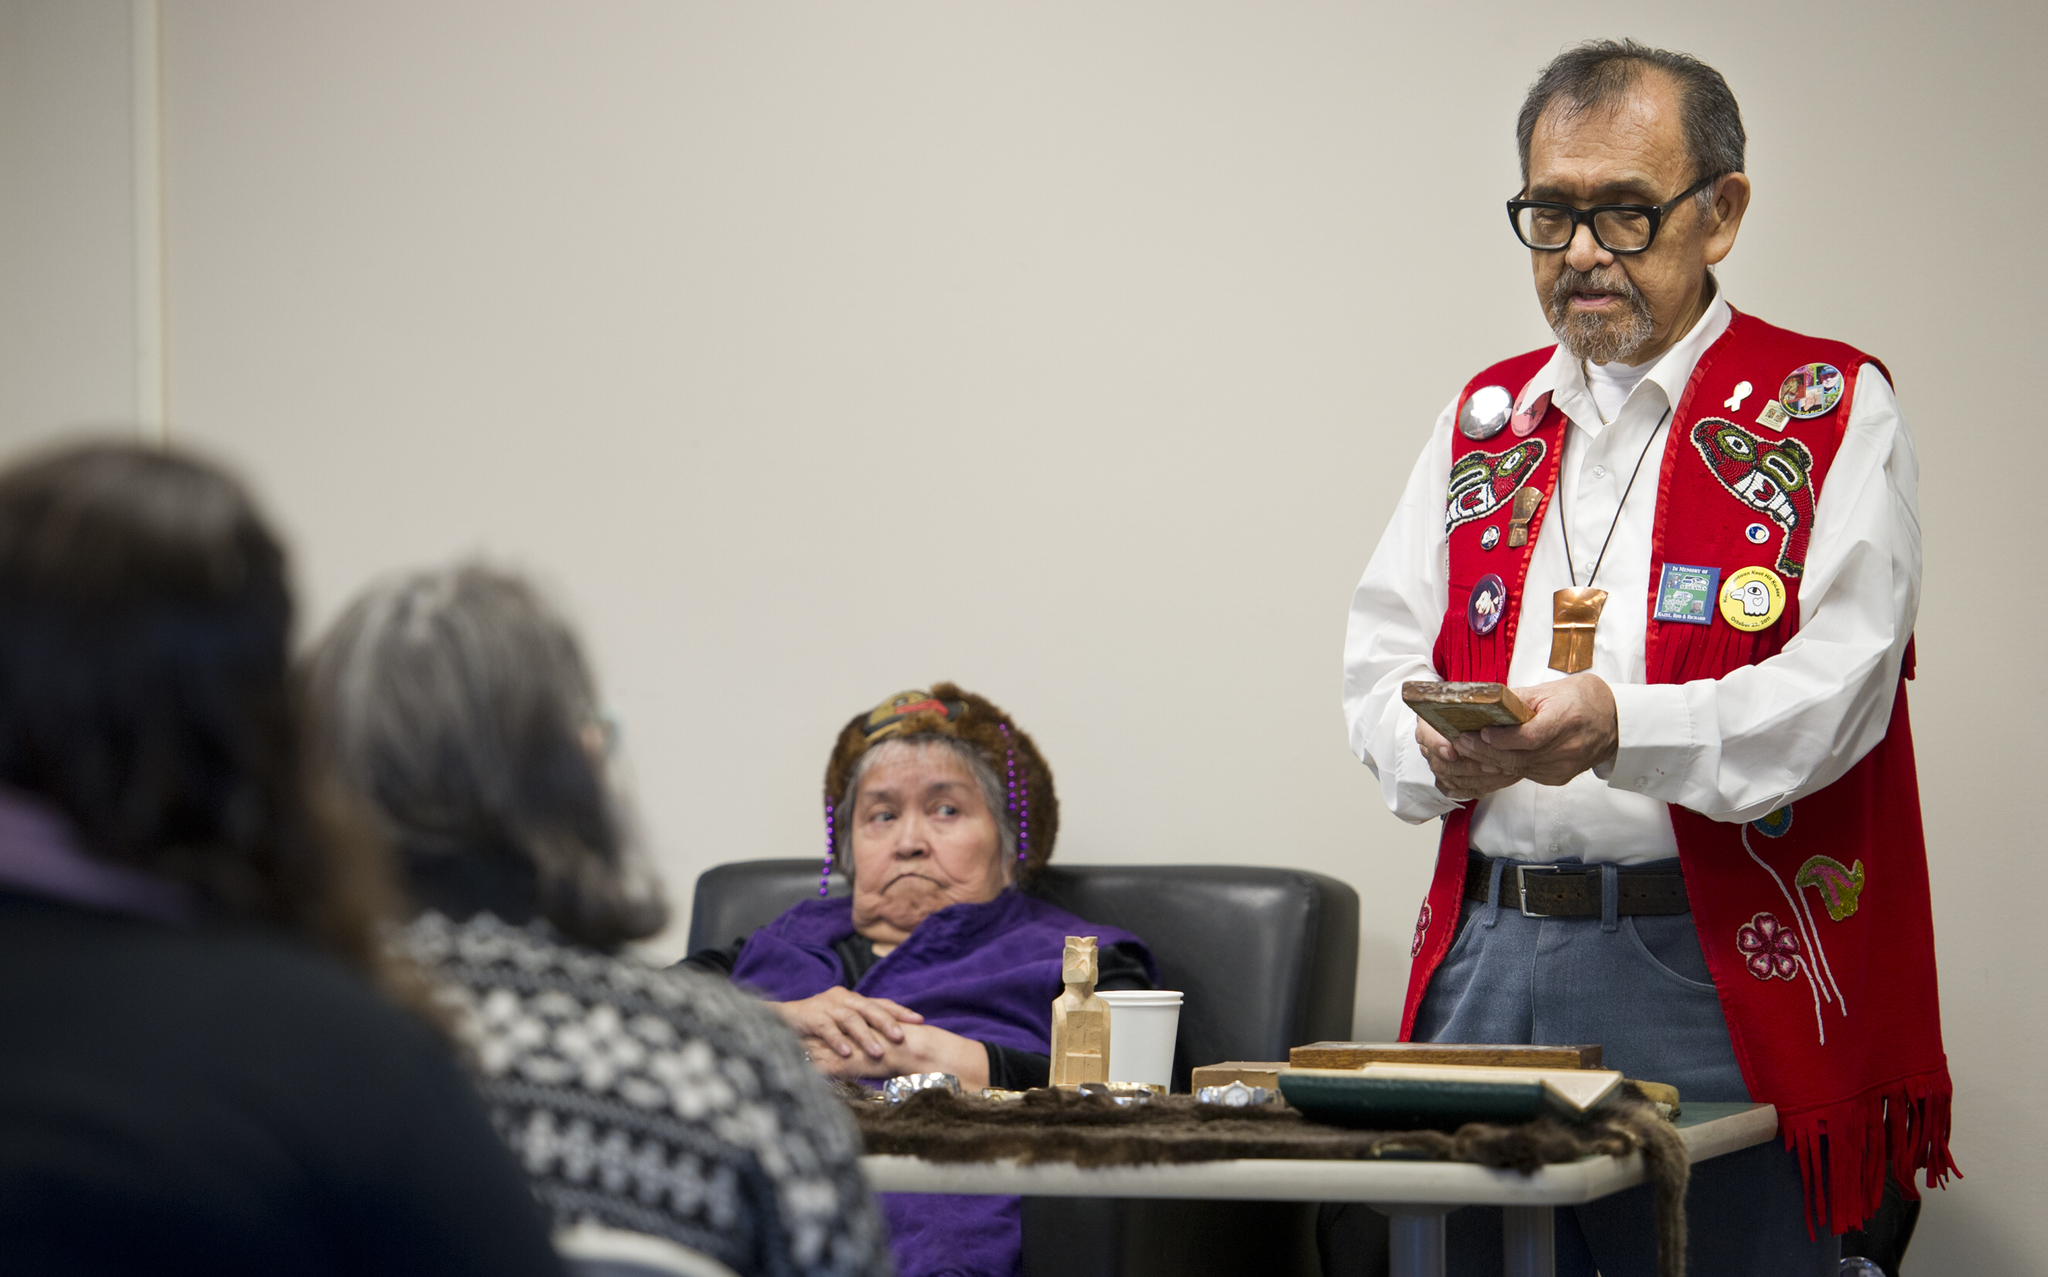 Percy Kunz watches her husband, Ed, as he speaks about his jewelery making during the University of Alaska Southeast’s Art of Place on Friday, Feb. 17, 2017.